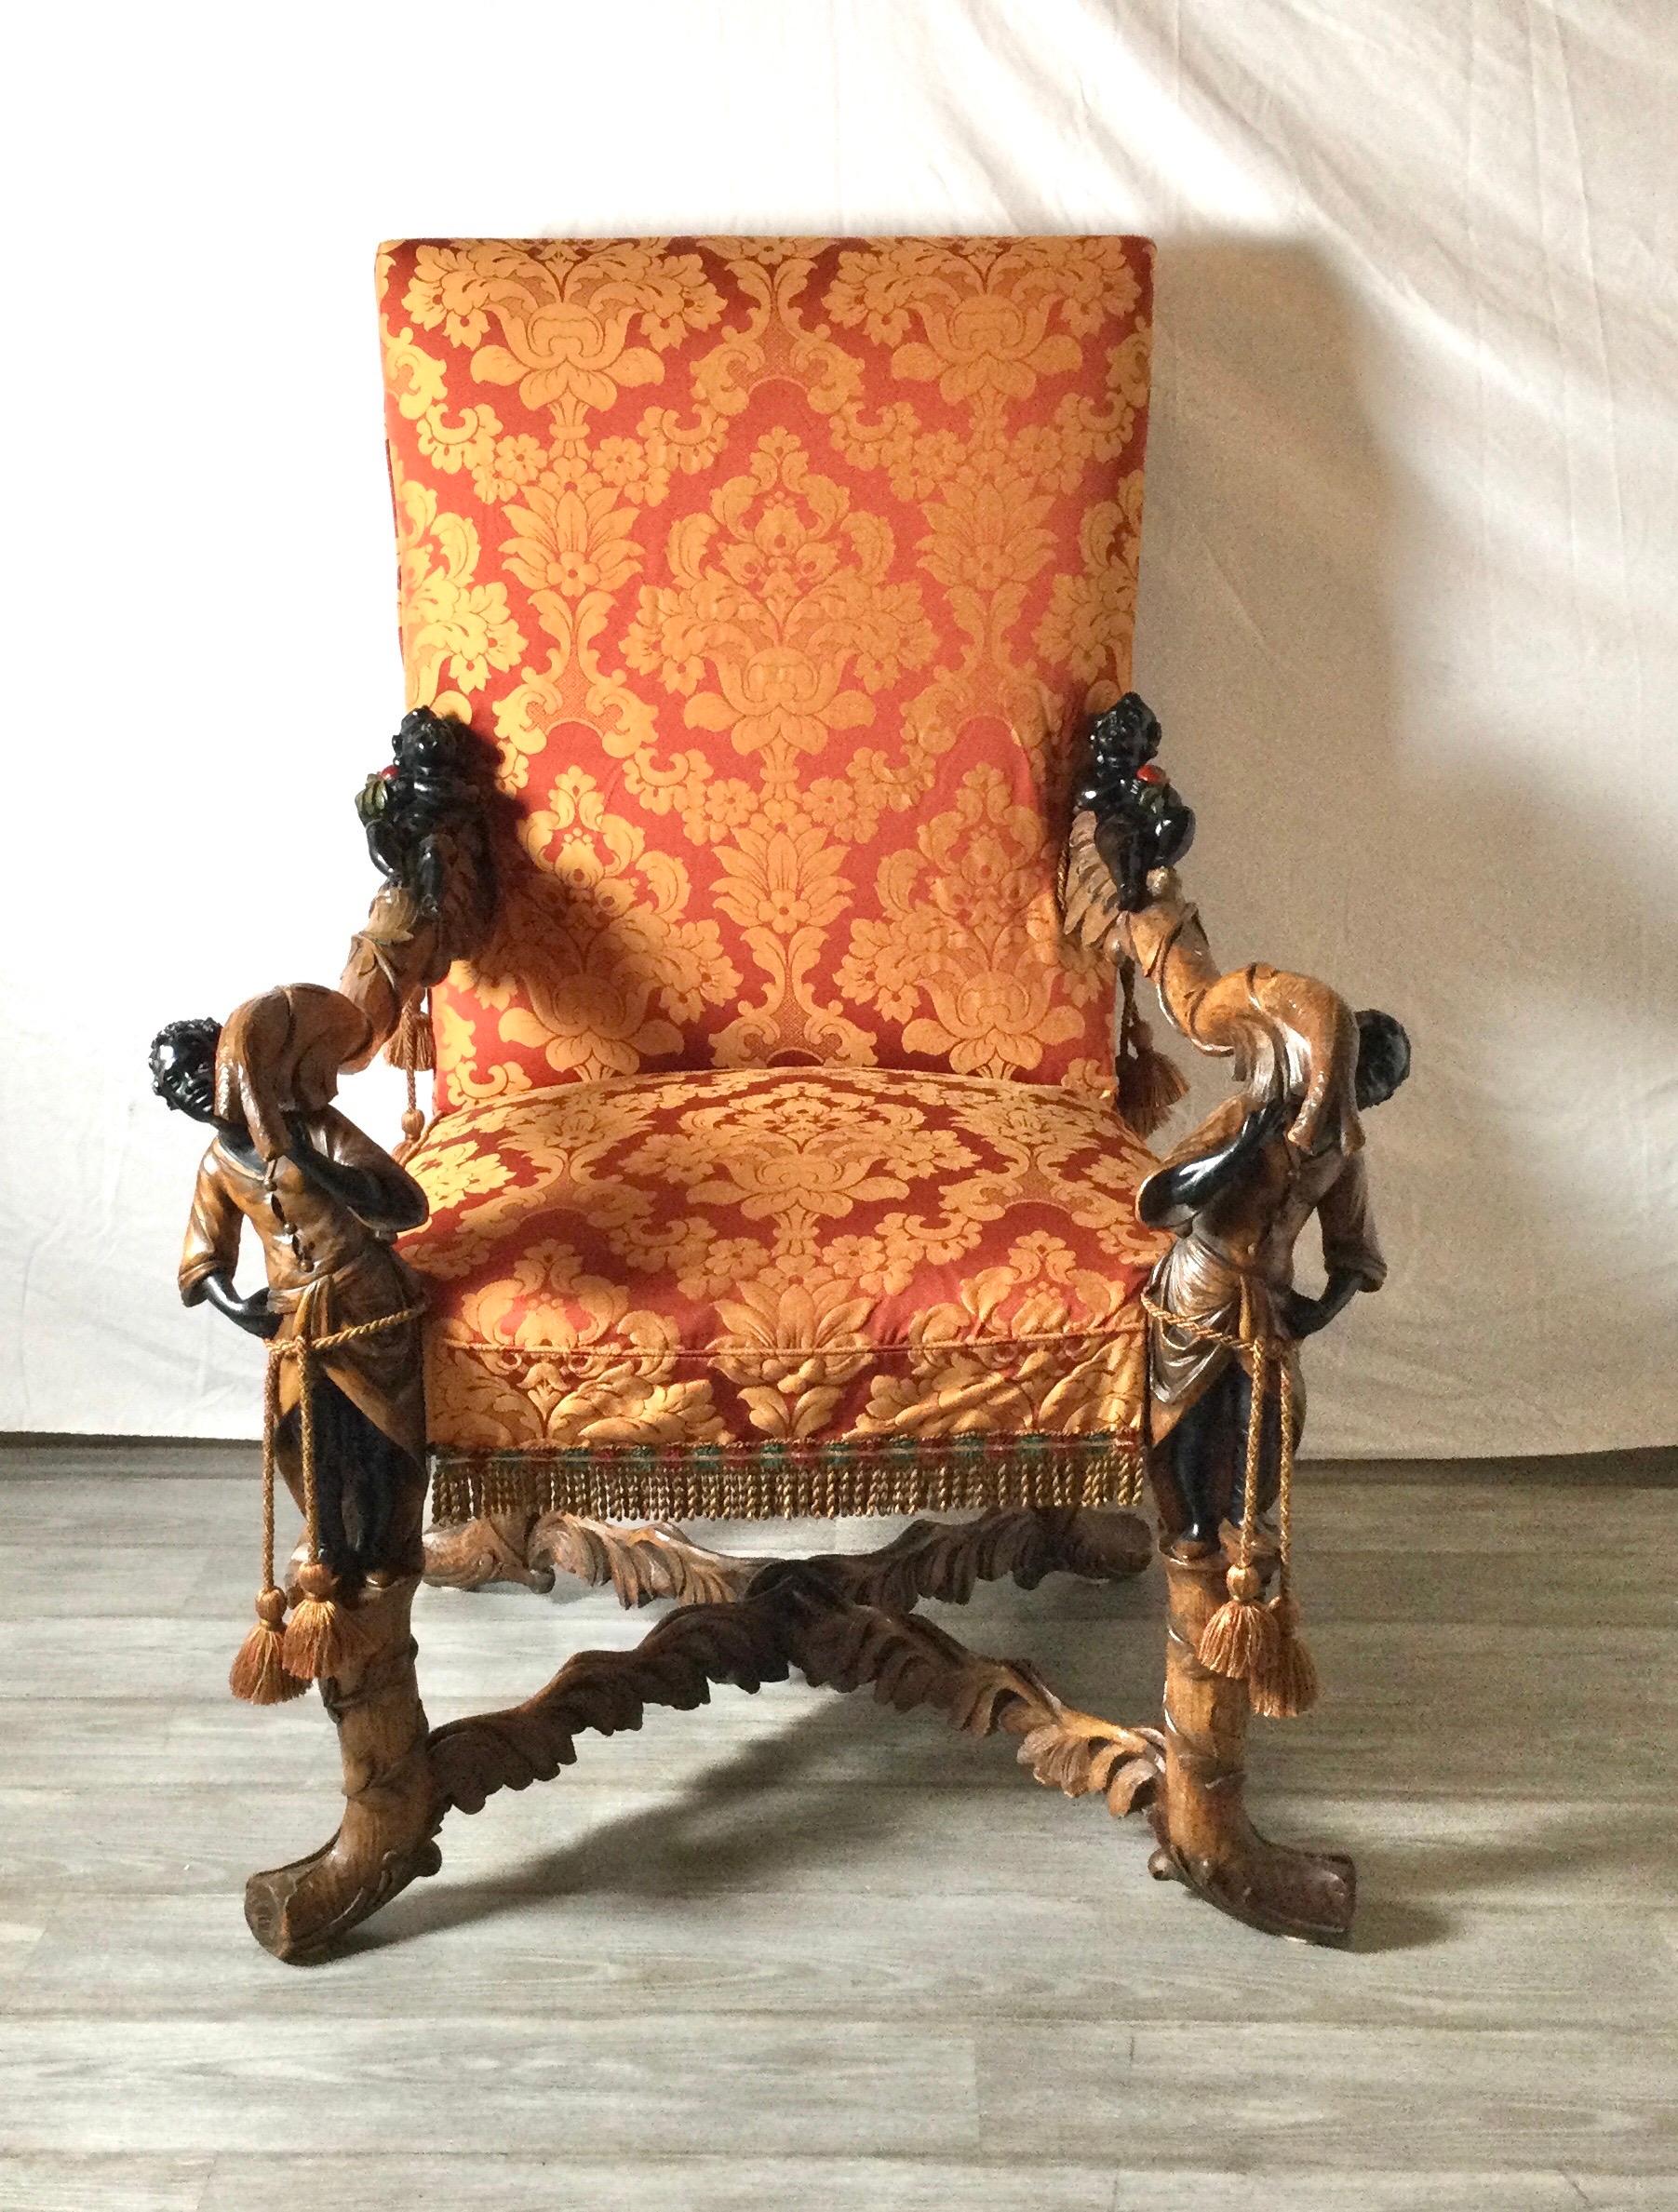 Exceptionally hand carved 19th century Lolling chair with hand carved branch and leaf motif with ebonized figures on the top and bottom of the arms. This chair is a larger scale with impressive workmanship. The custom high quality damask slip cover